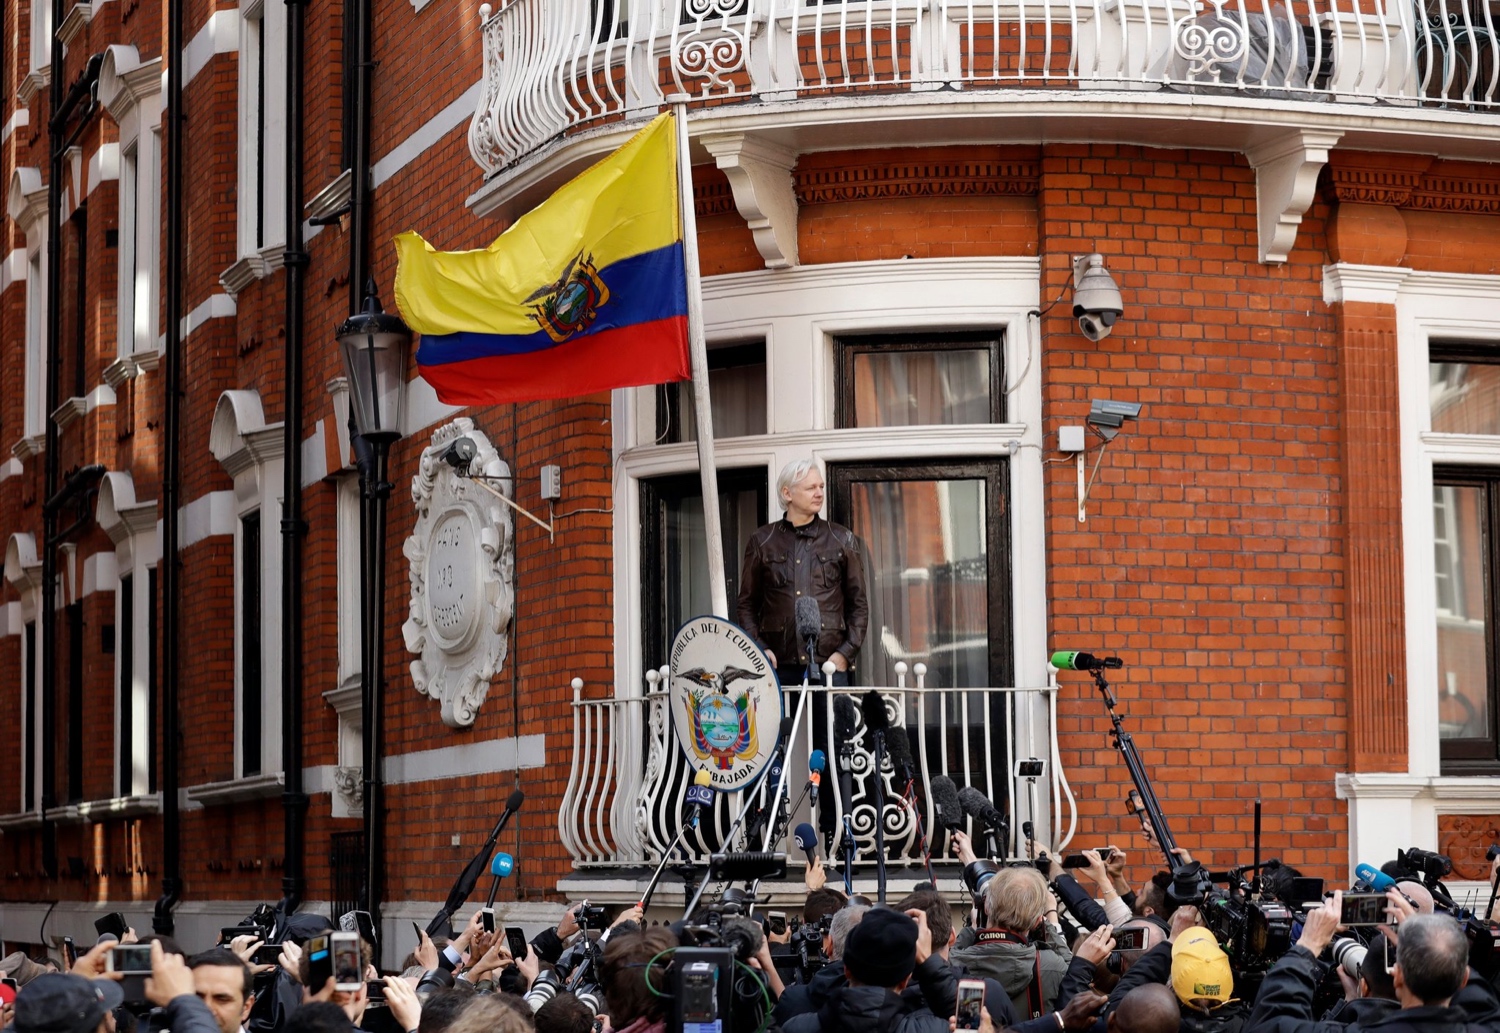 The WikiLeaks founder Julian Assange in 2017 on the balcony of the Ecuadorean Embassy in London. The Ecuadorean government said this March that it had cut off his internet access.CreditCreditMatt Dunham/Associated Press